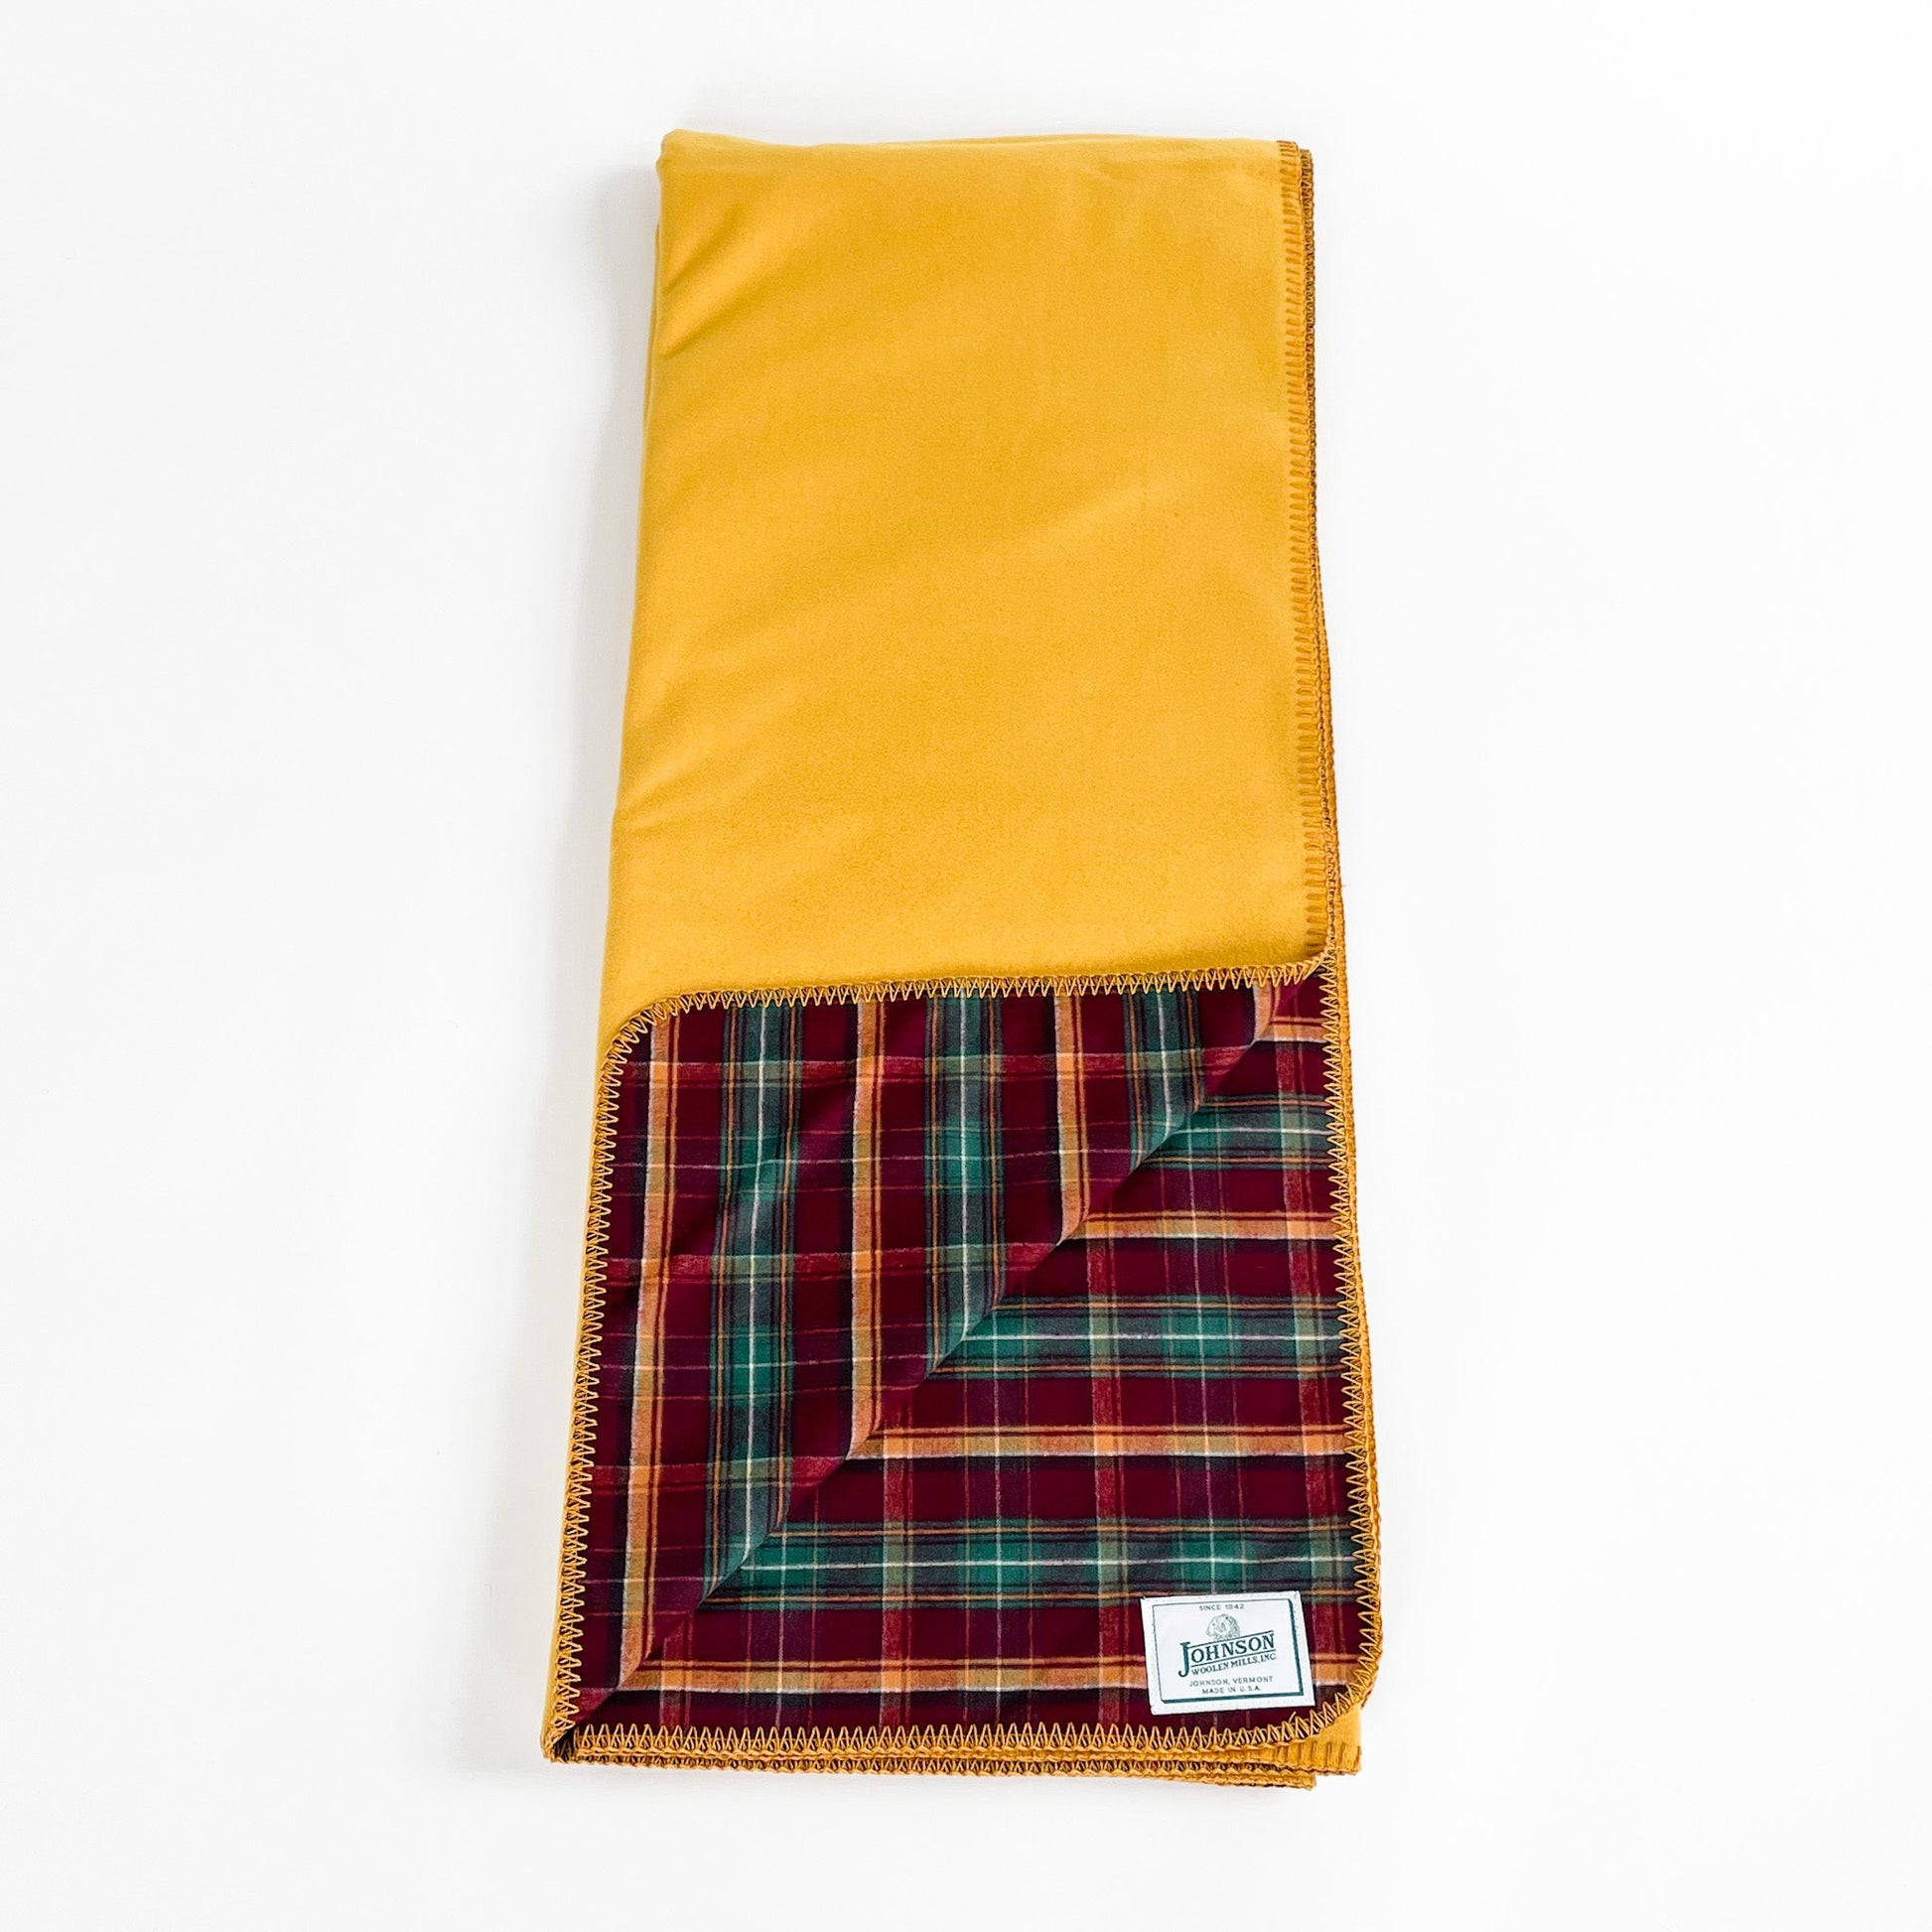 Flannel Wool Throws, yellow wool outside, flannel whiskey river inside, front view opened